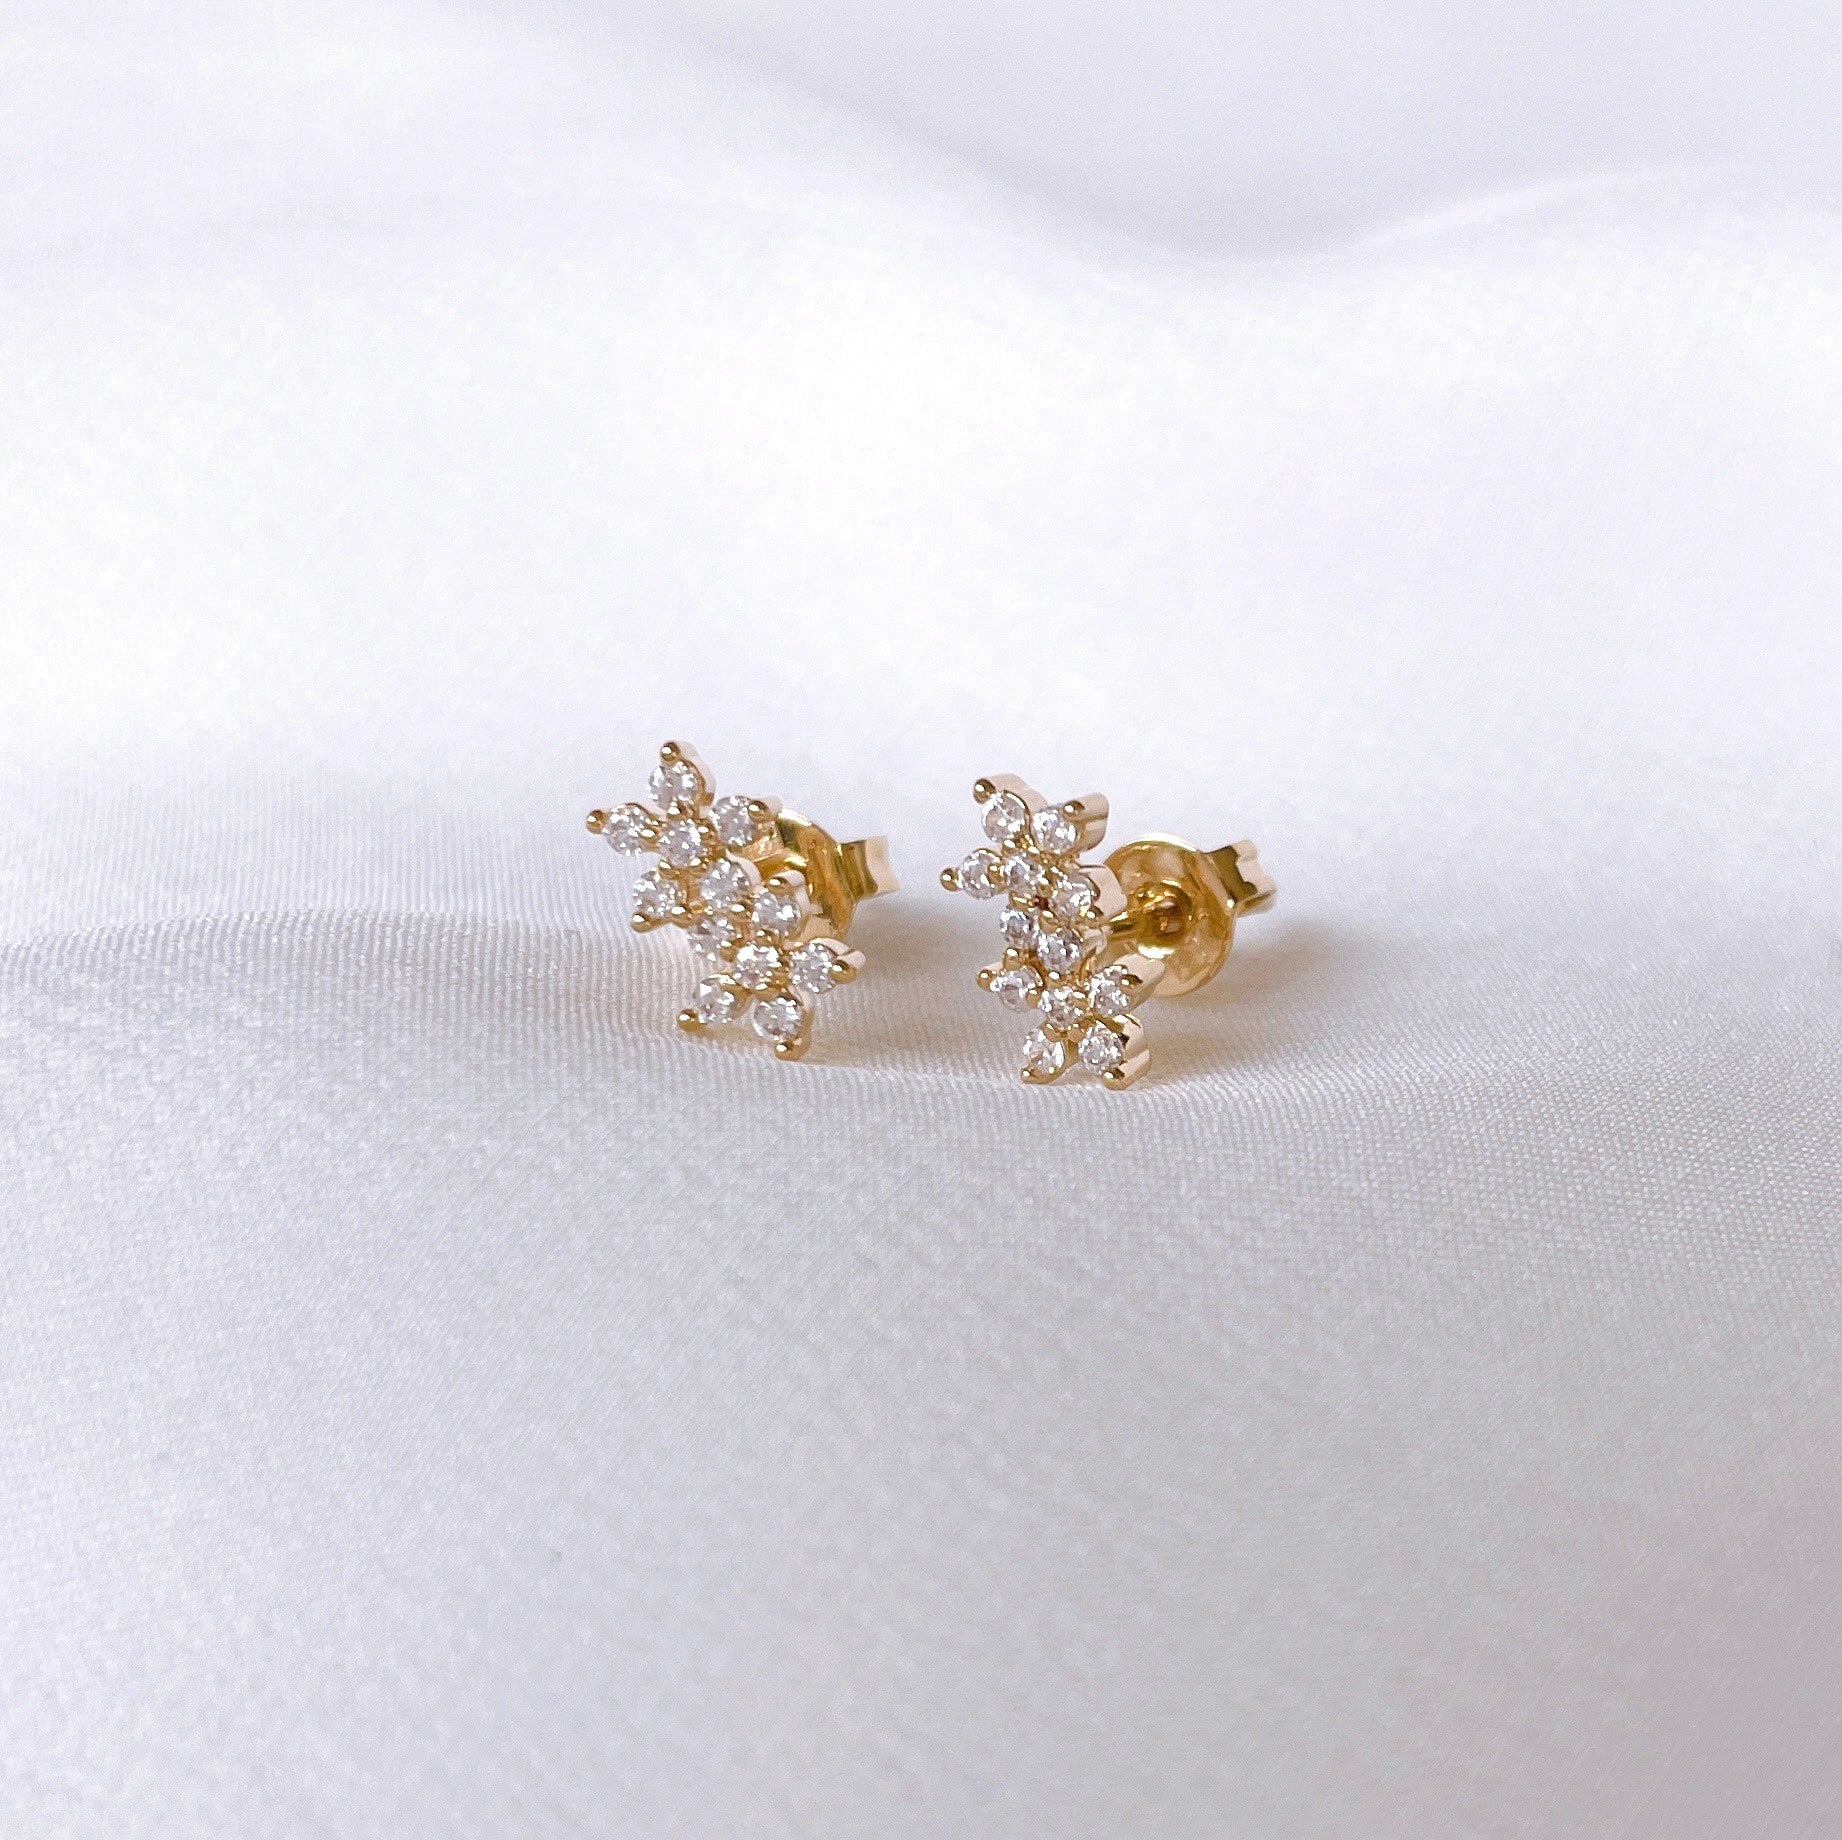 Gold-plated “Sissi” earrings